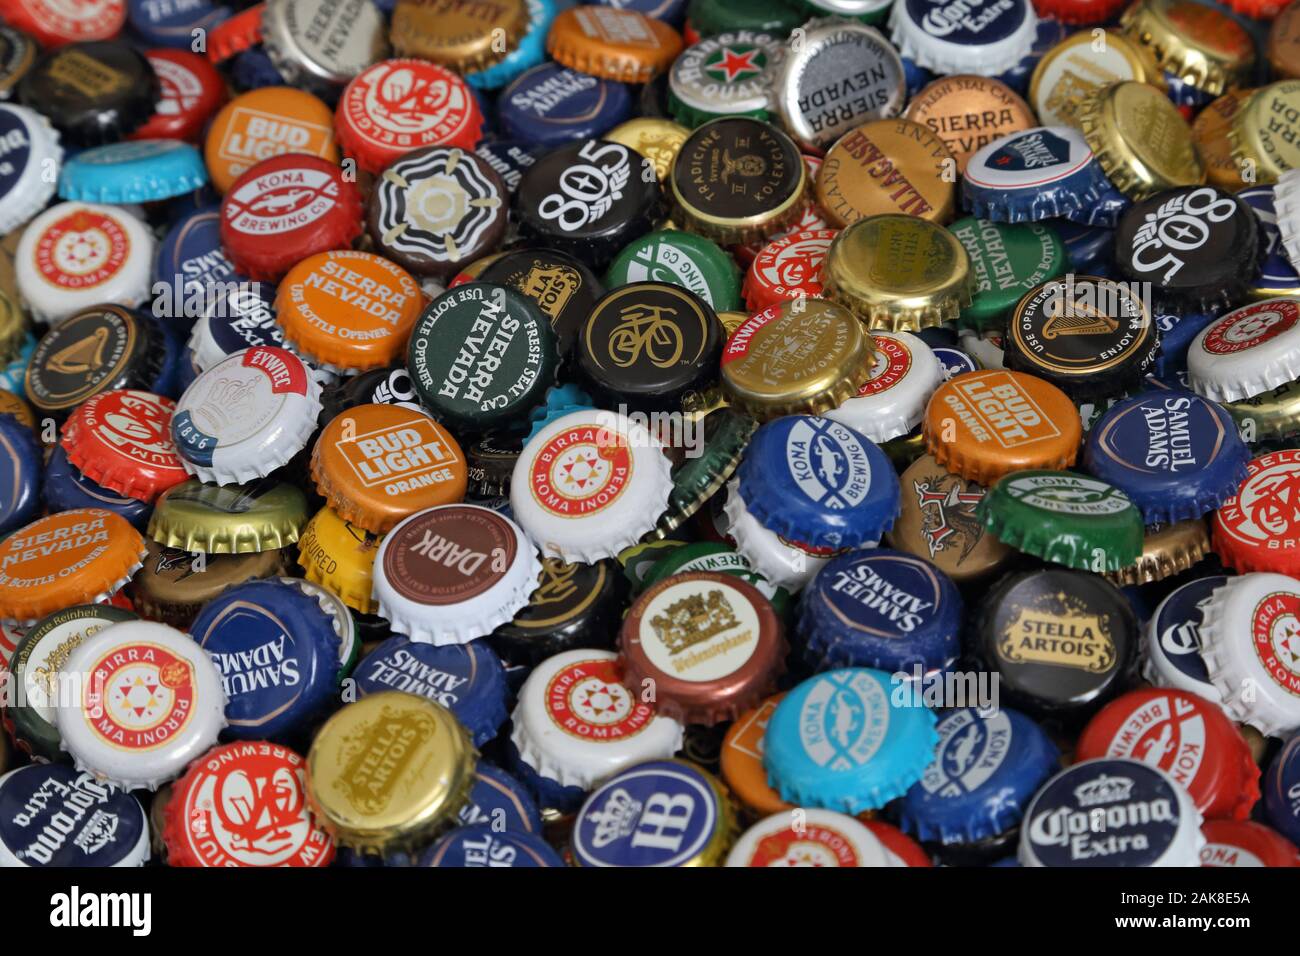 Los Angeles, CA / USA - Jan. 4, 2020: Colorful beer bottle caps from a variety of international brands are shown loosely displayed in a pile. Stock Photo